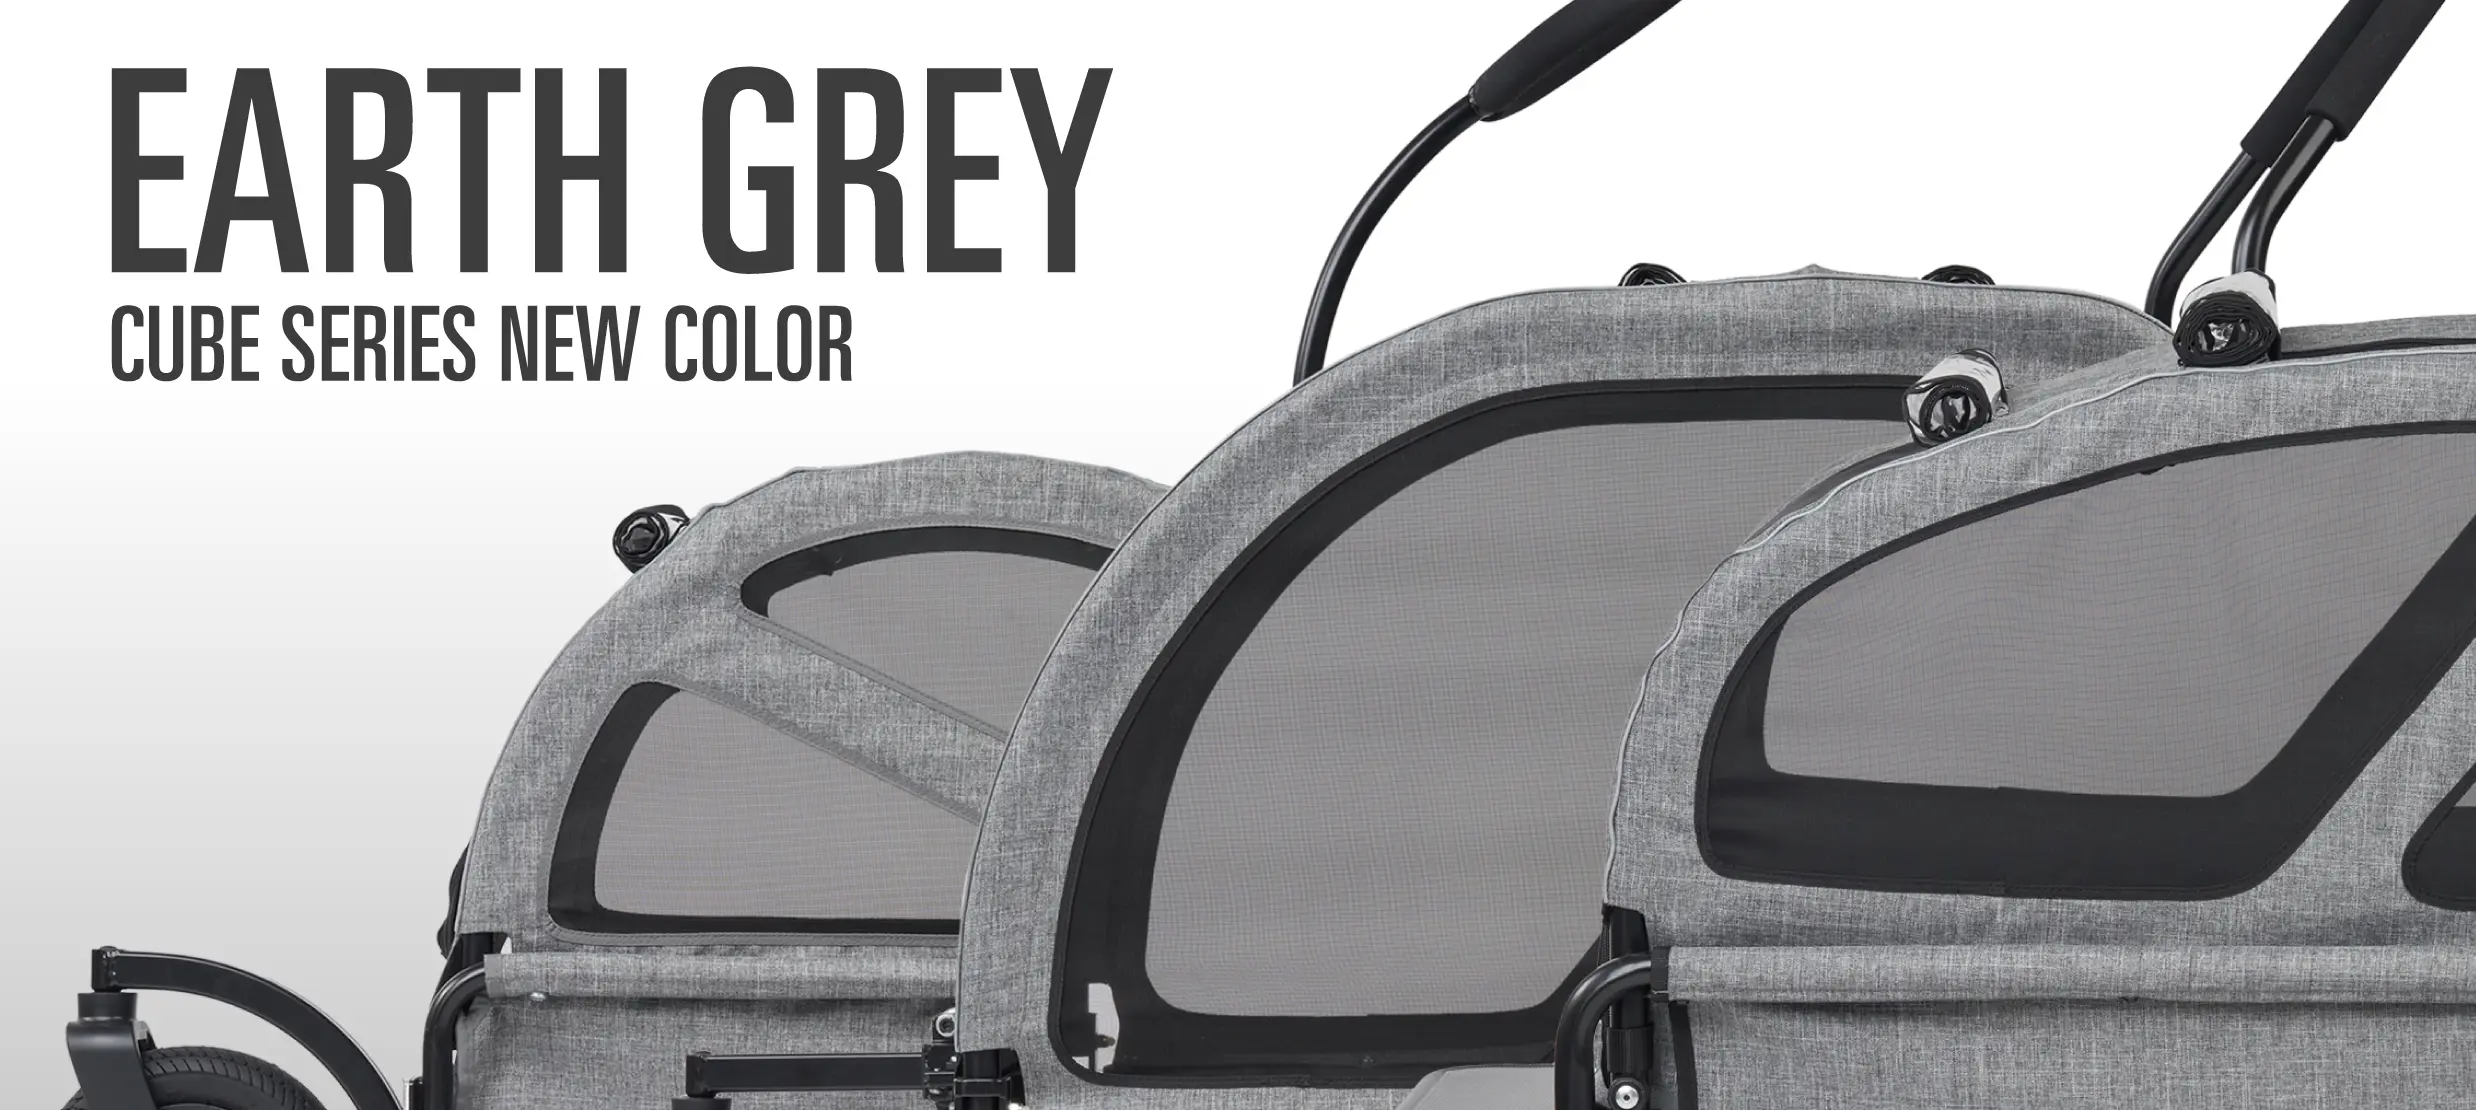 EARTH GREY | CUBE SERIES NEW COLOR